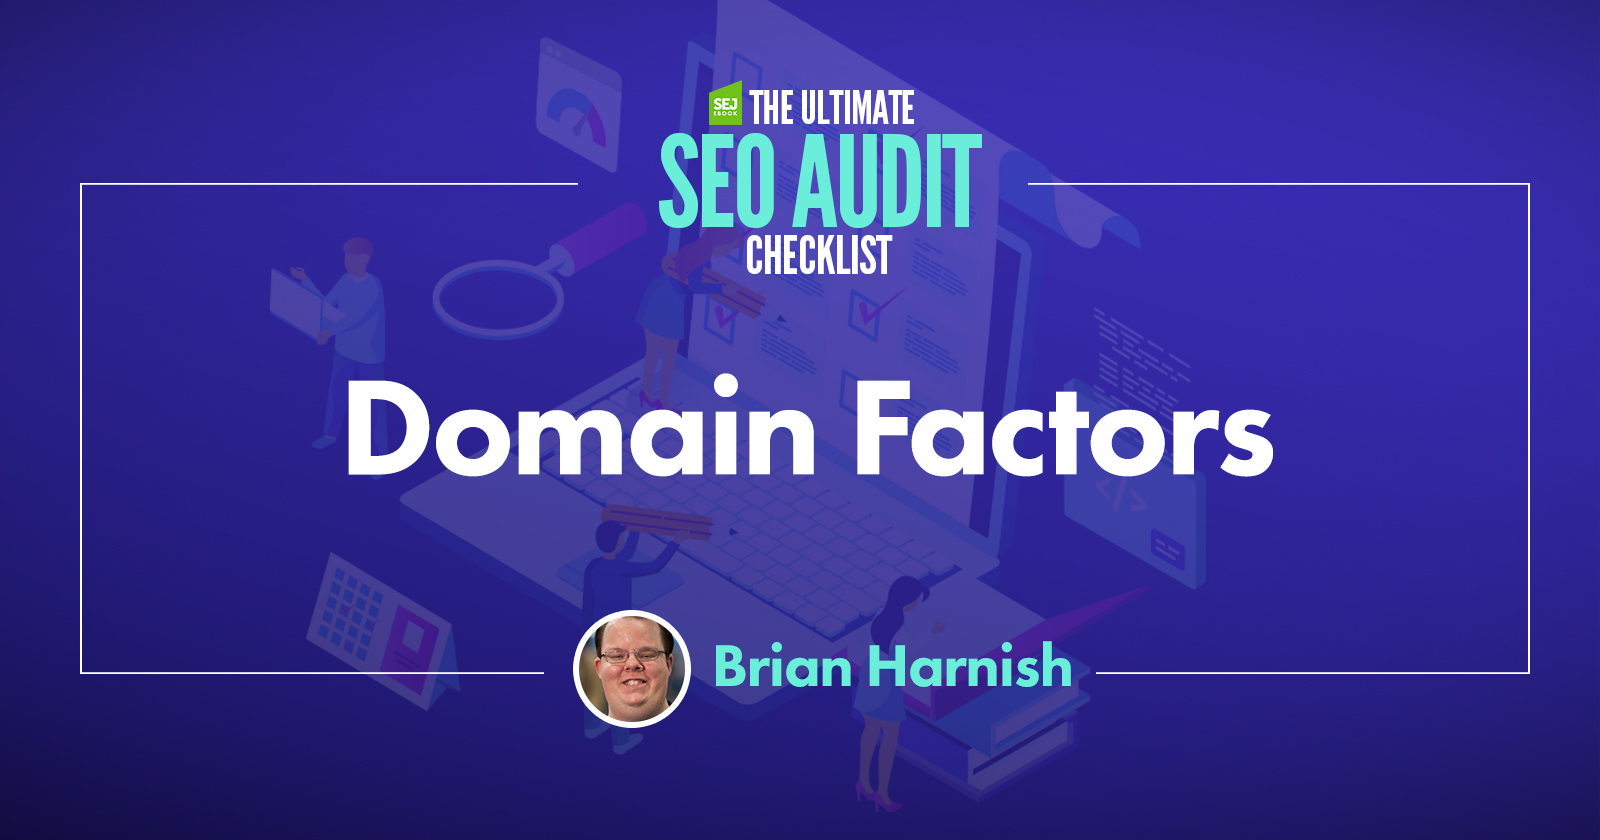 10 Website Content Factors You Must Check During an SEO Audit